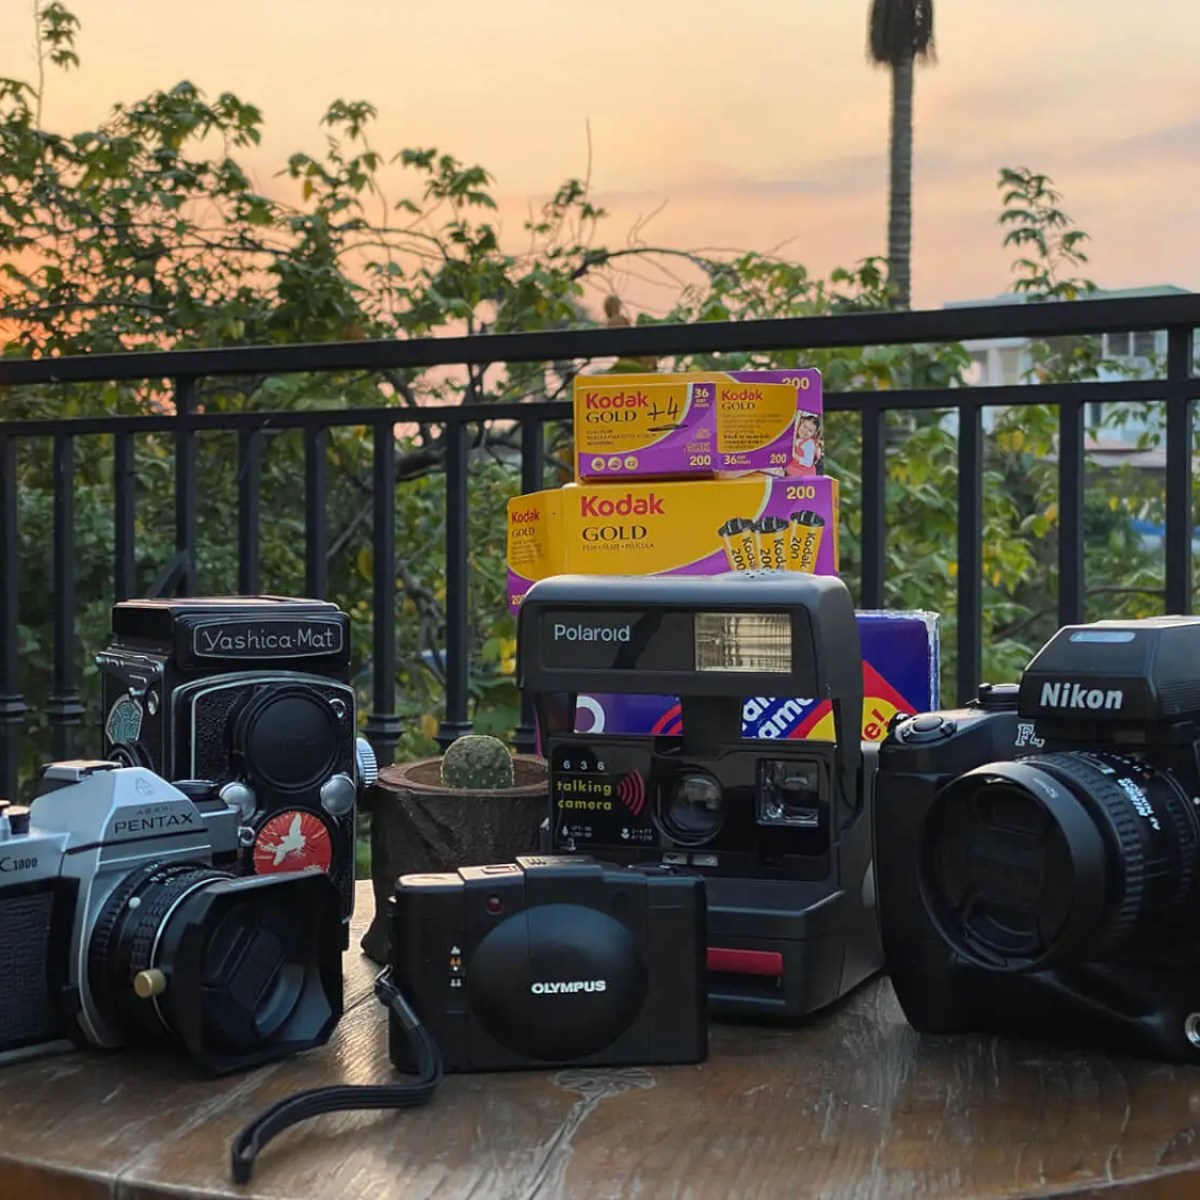 Cameras used, from left to right: Pentax K1000, Yashica Mat, Olympus XA2, Polaroid 636, and Nikon F4s.